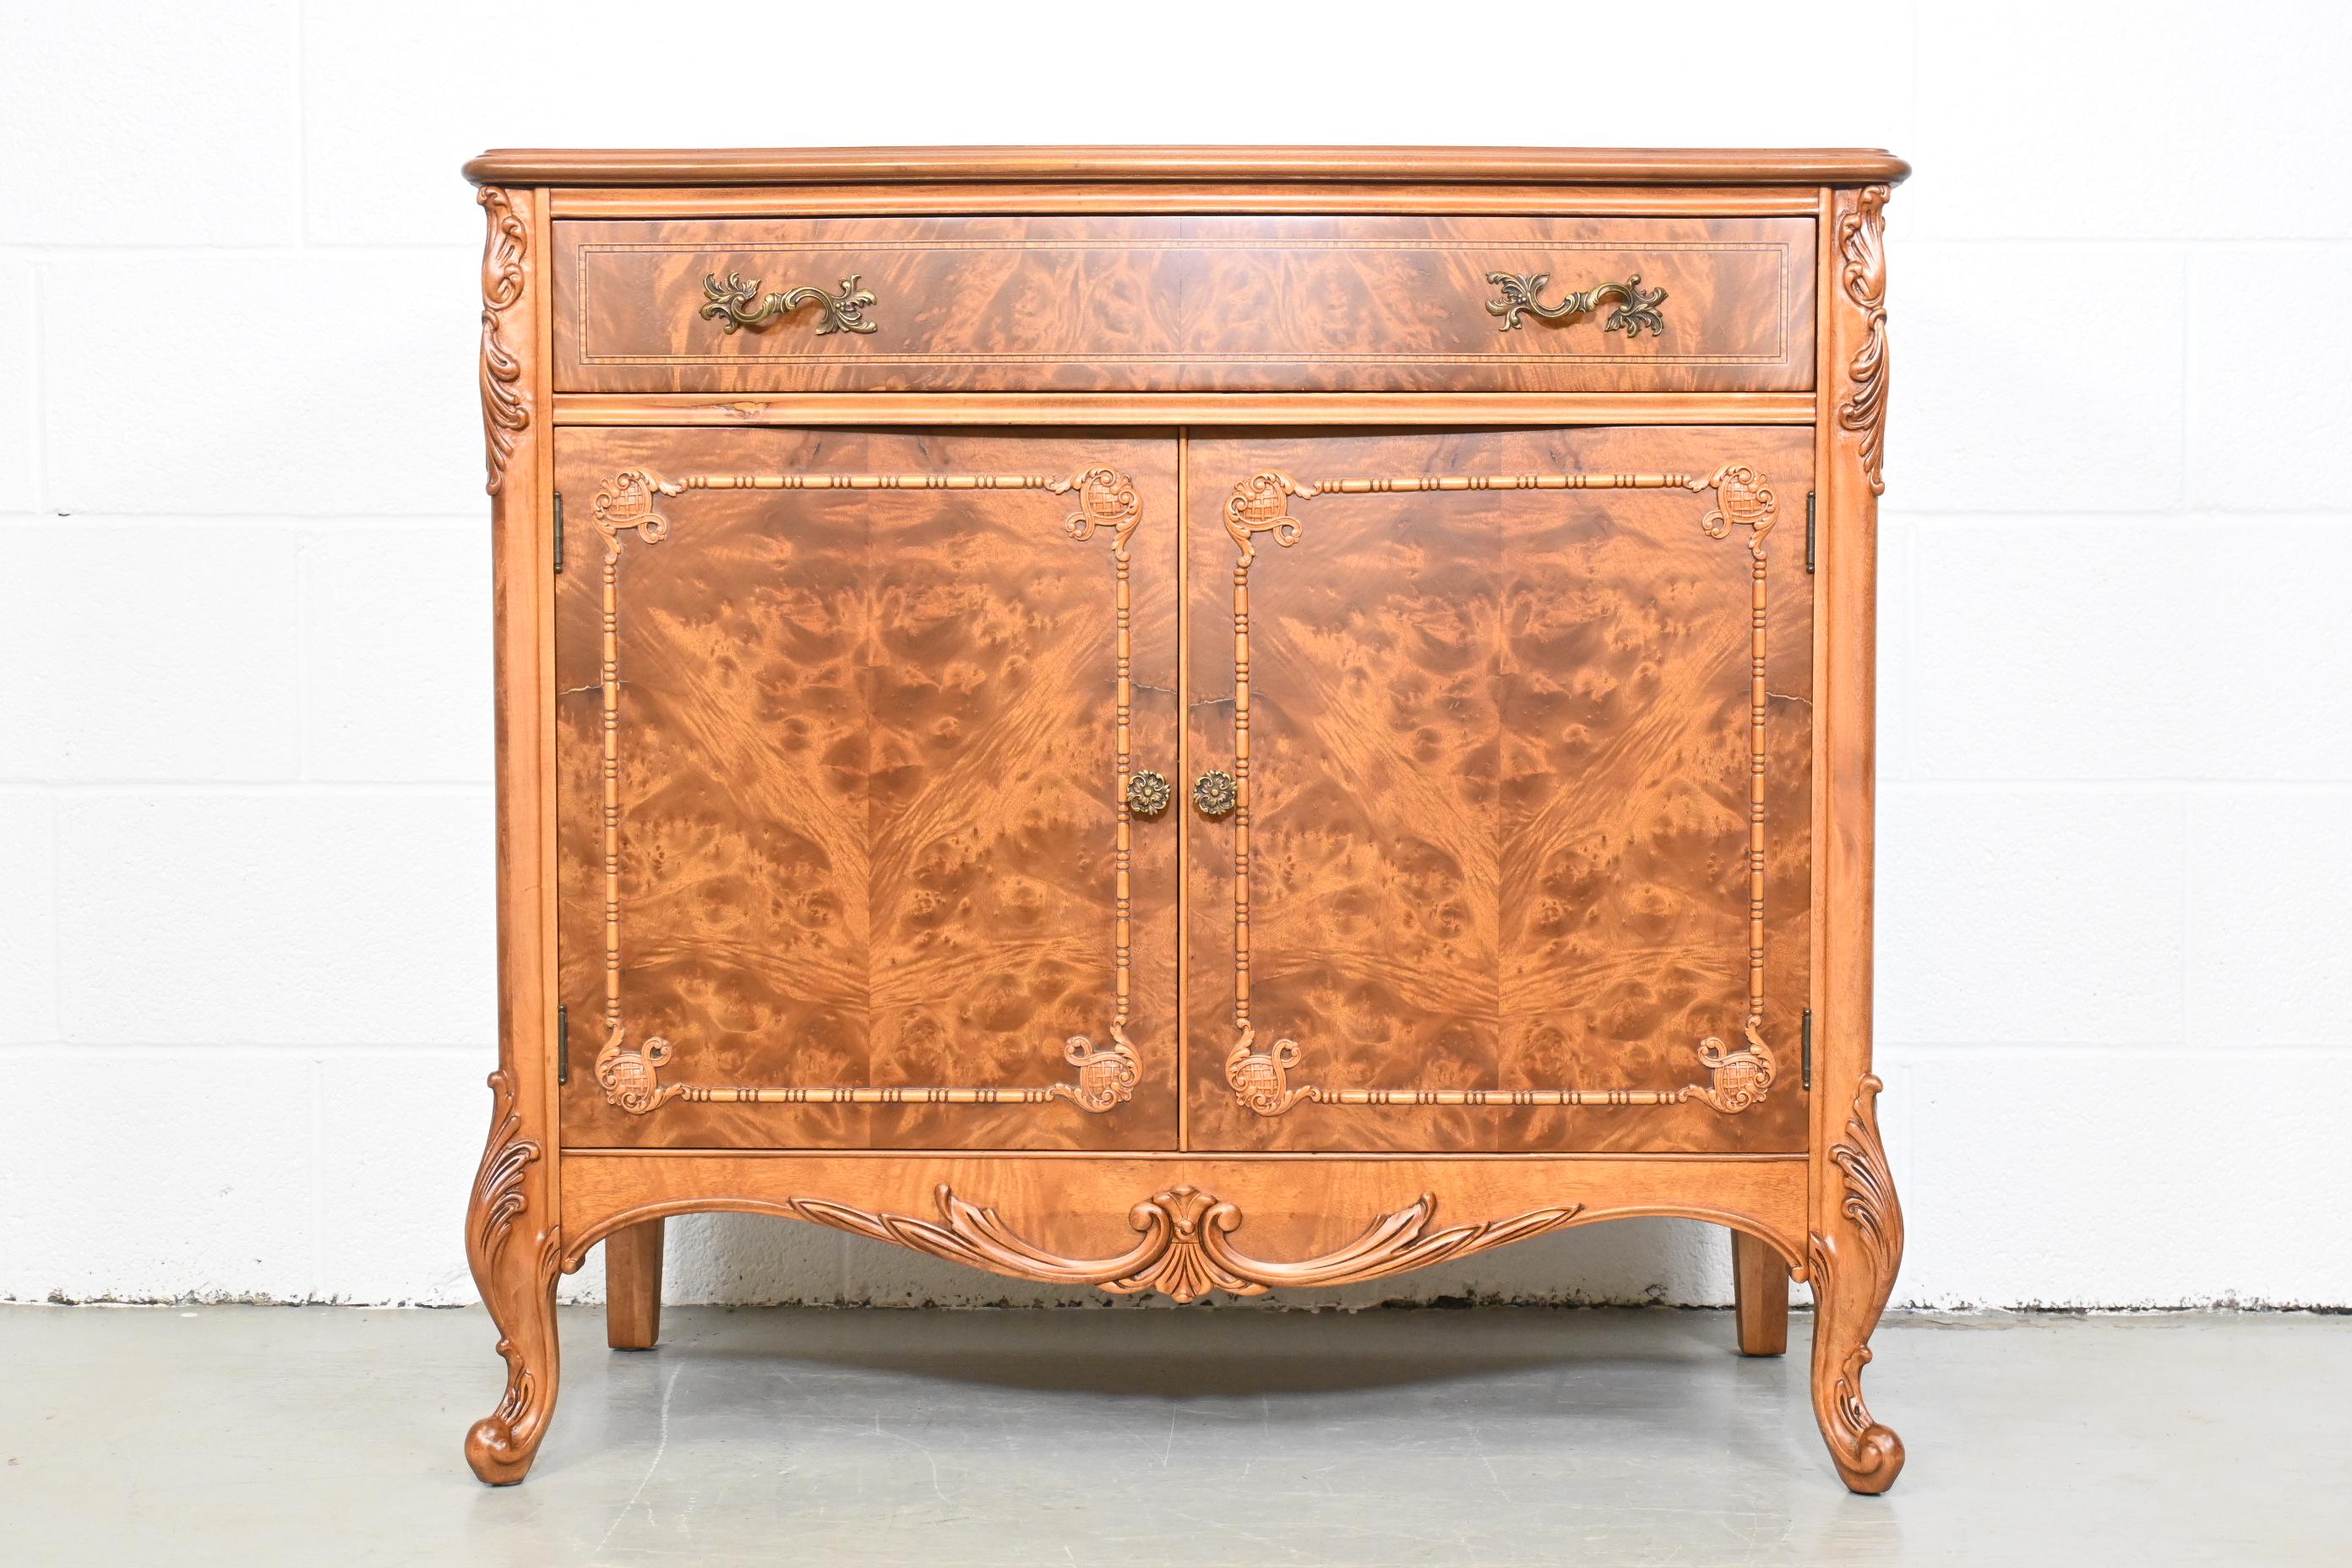 Rockford Furniture French Burl Wood Sideboard or Buffet

Rockford Furniture Company, USA, 1930s

Measures: 35.25 Wide x 18.25 Deep x 32.75 High

French burl wood sideboard with 1 drawer and cabinet. Style similar to Romweber and John